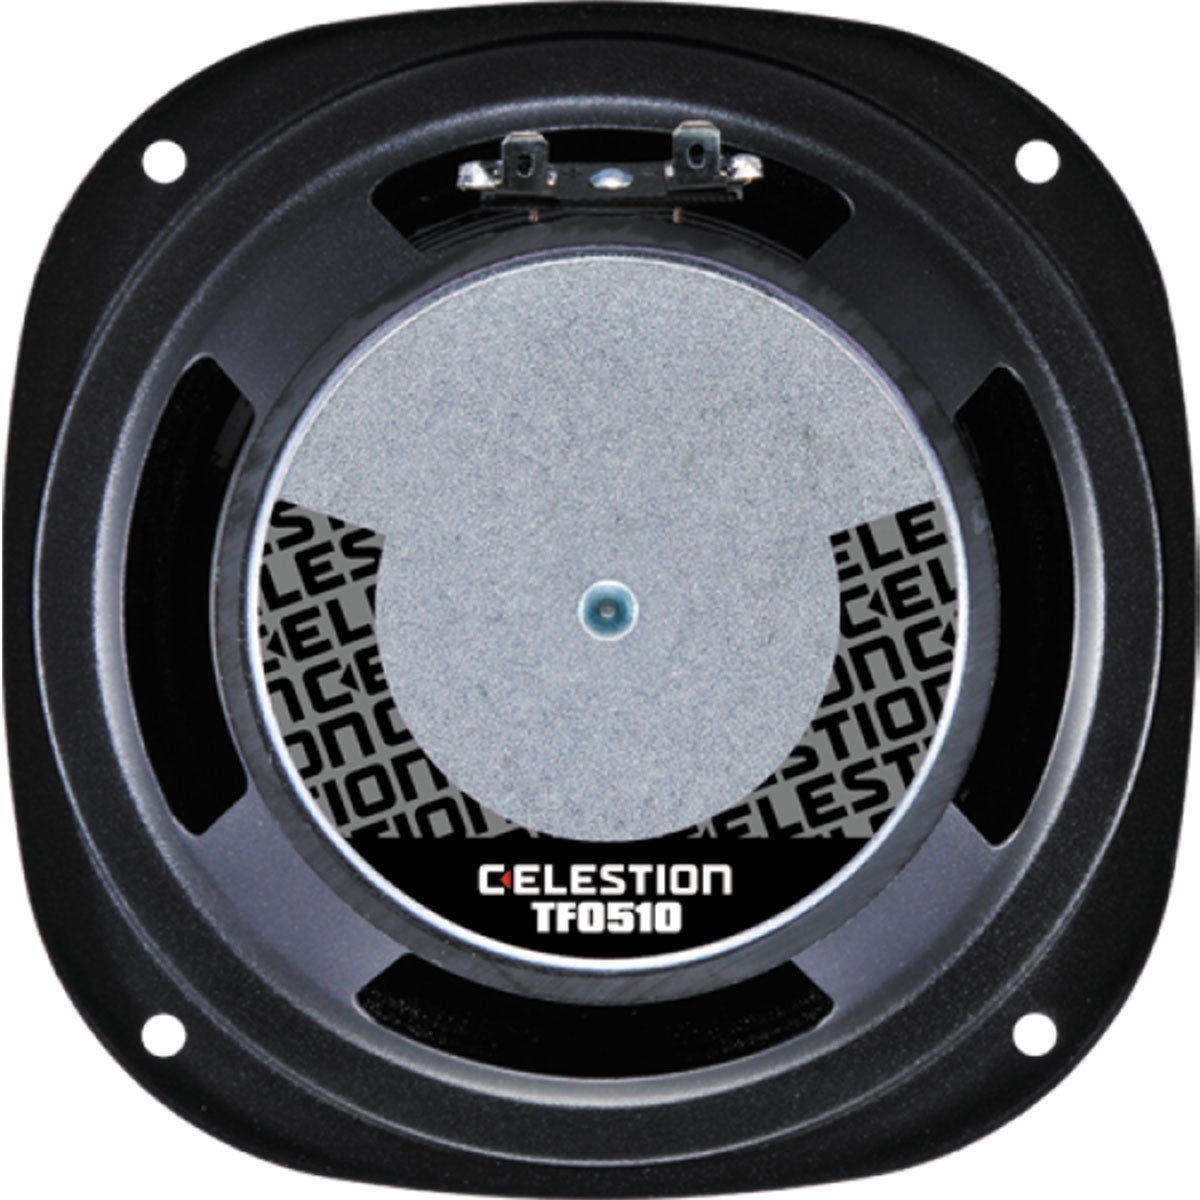 Celestion T5306 TF0510 Ferrite Magnet Steel Chassis Driver Speaker 5 Inch 30W 8OHM